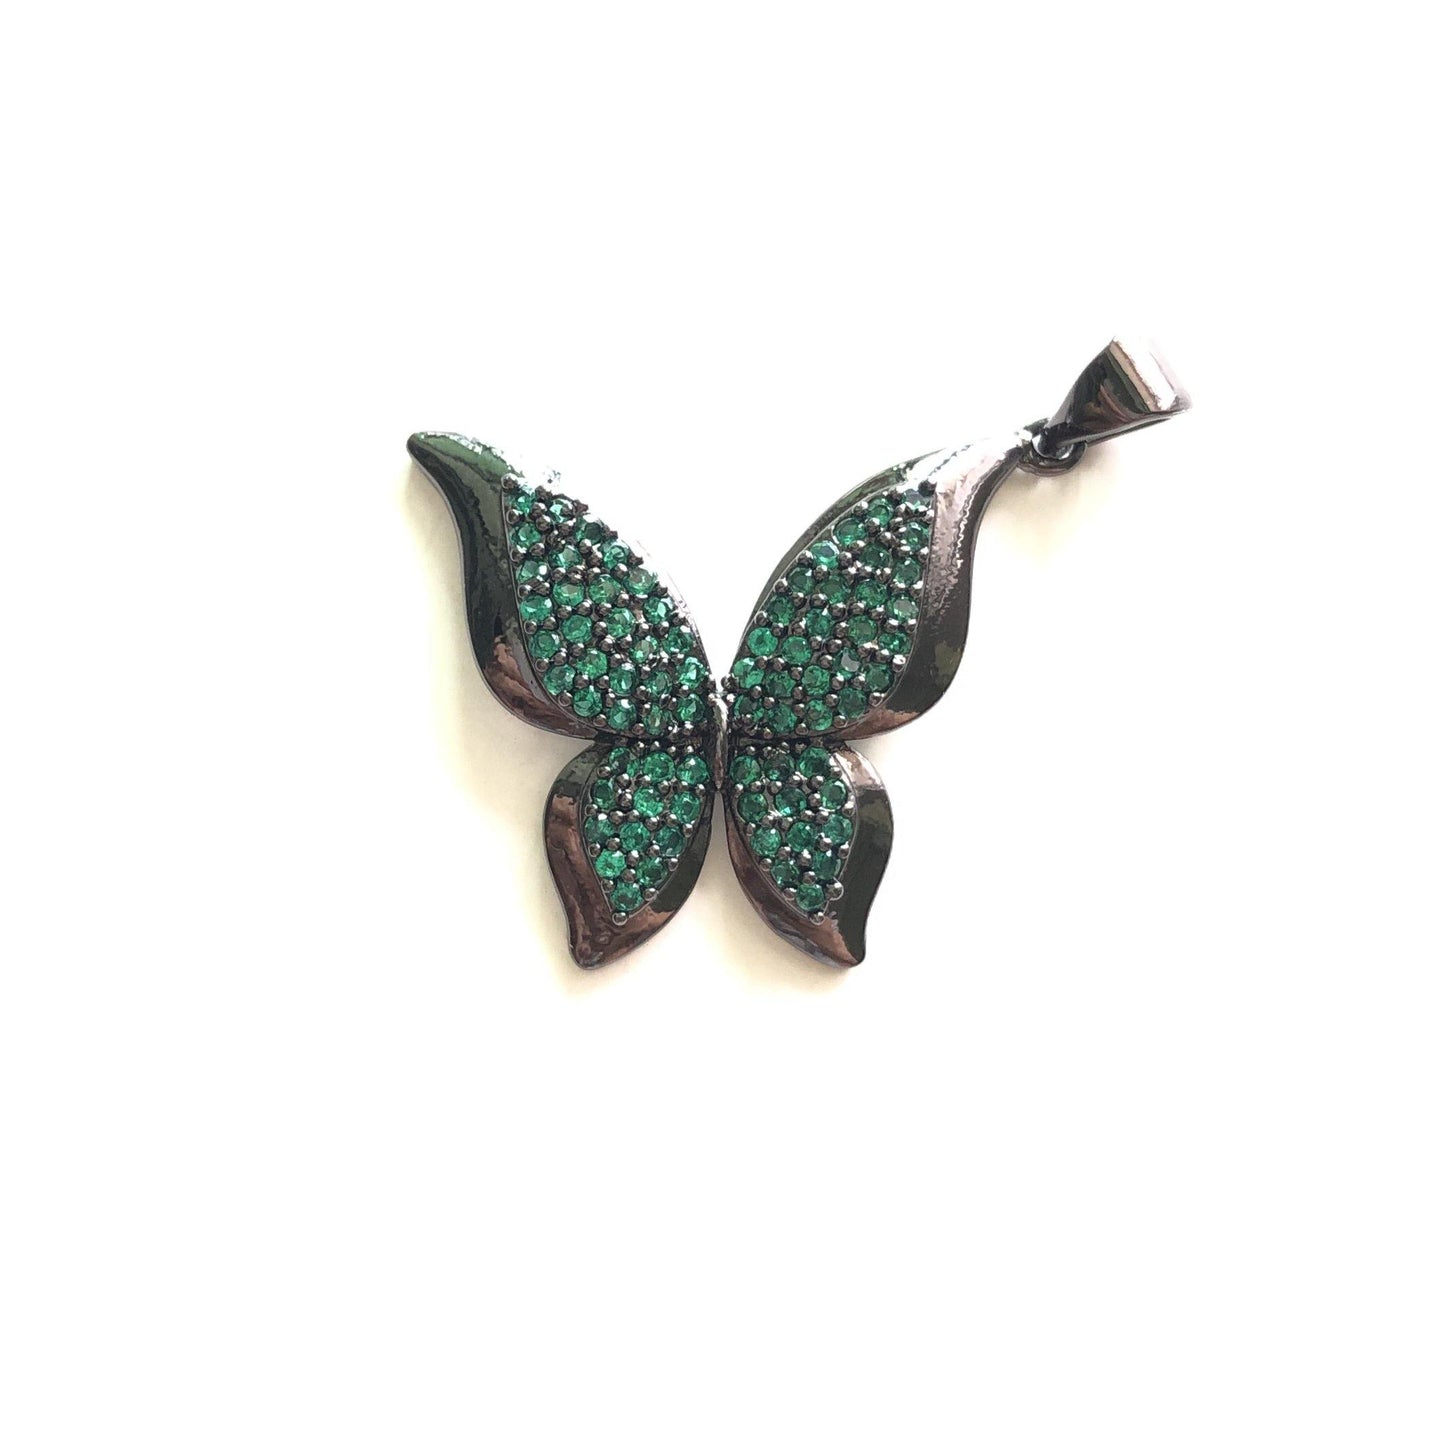 5pcs/lot 27*23mm Multicolor CZ Paved Butterfly Charms Green on Black CZ Paved Charms Butterflies Colorful Zirconia Charms Beads Beyond